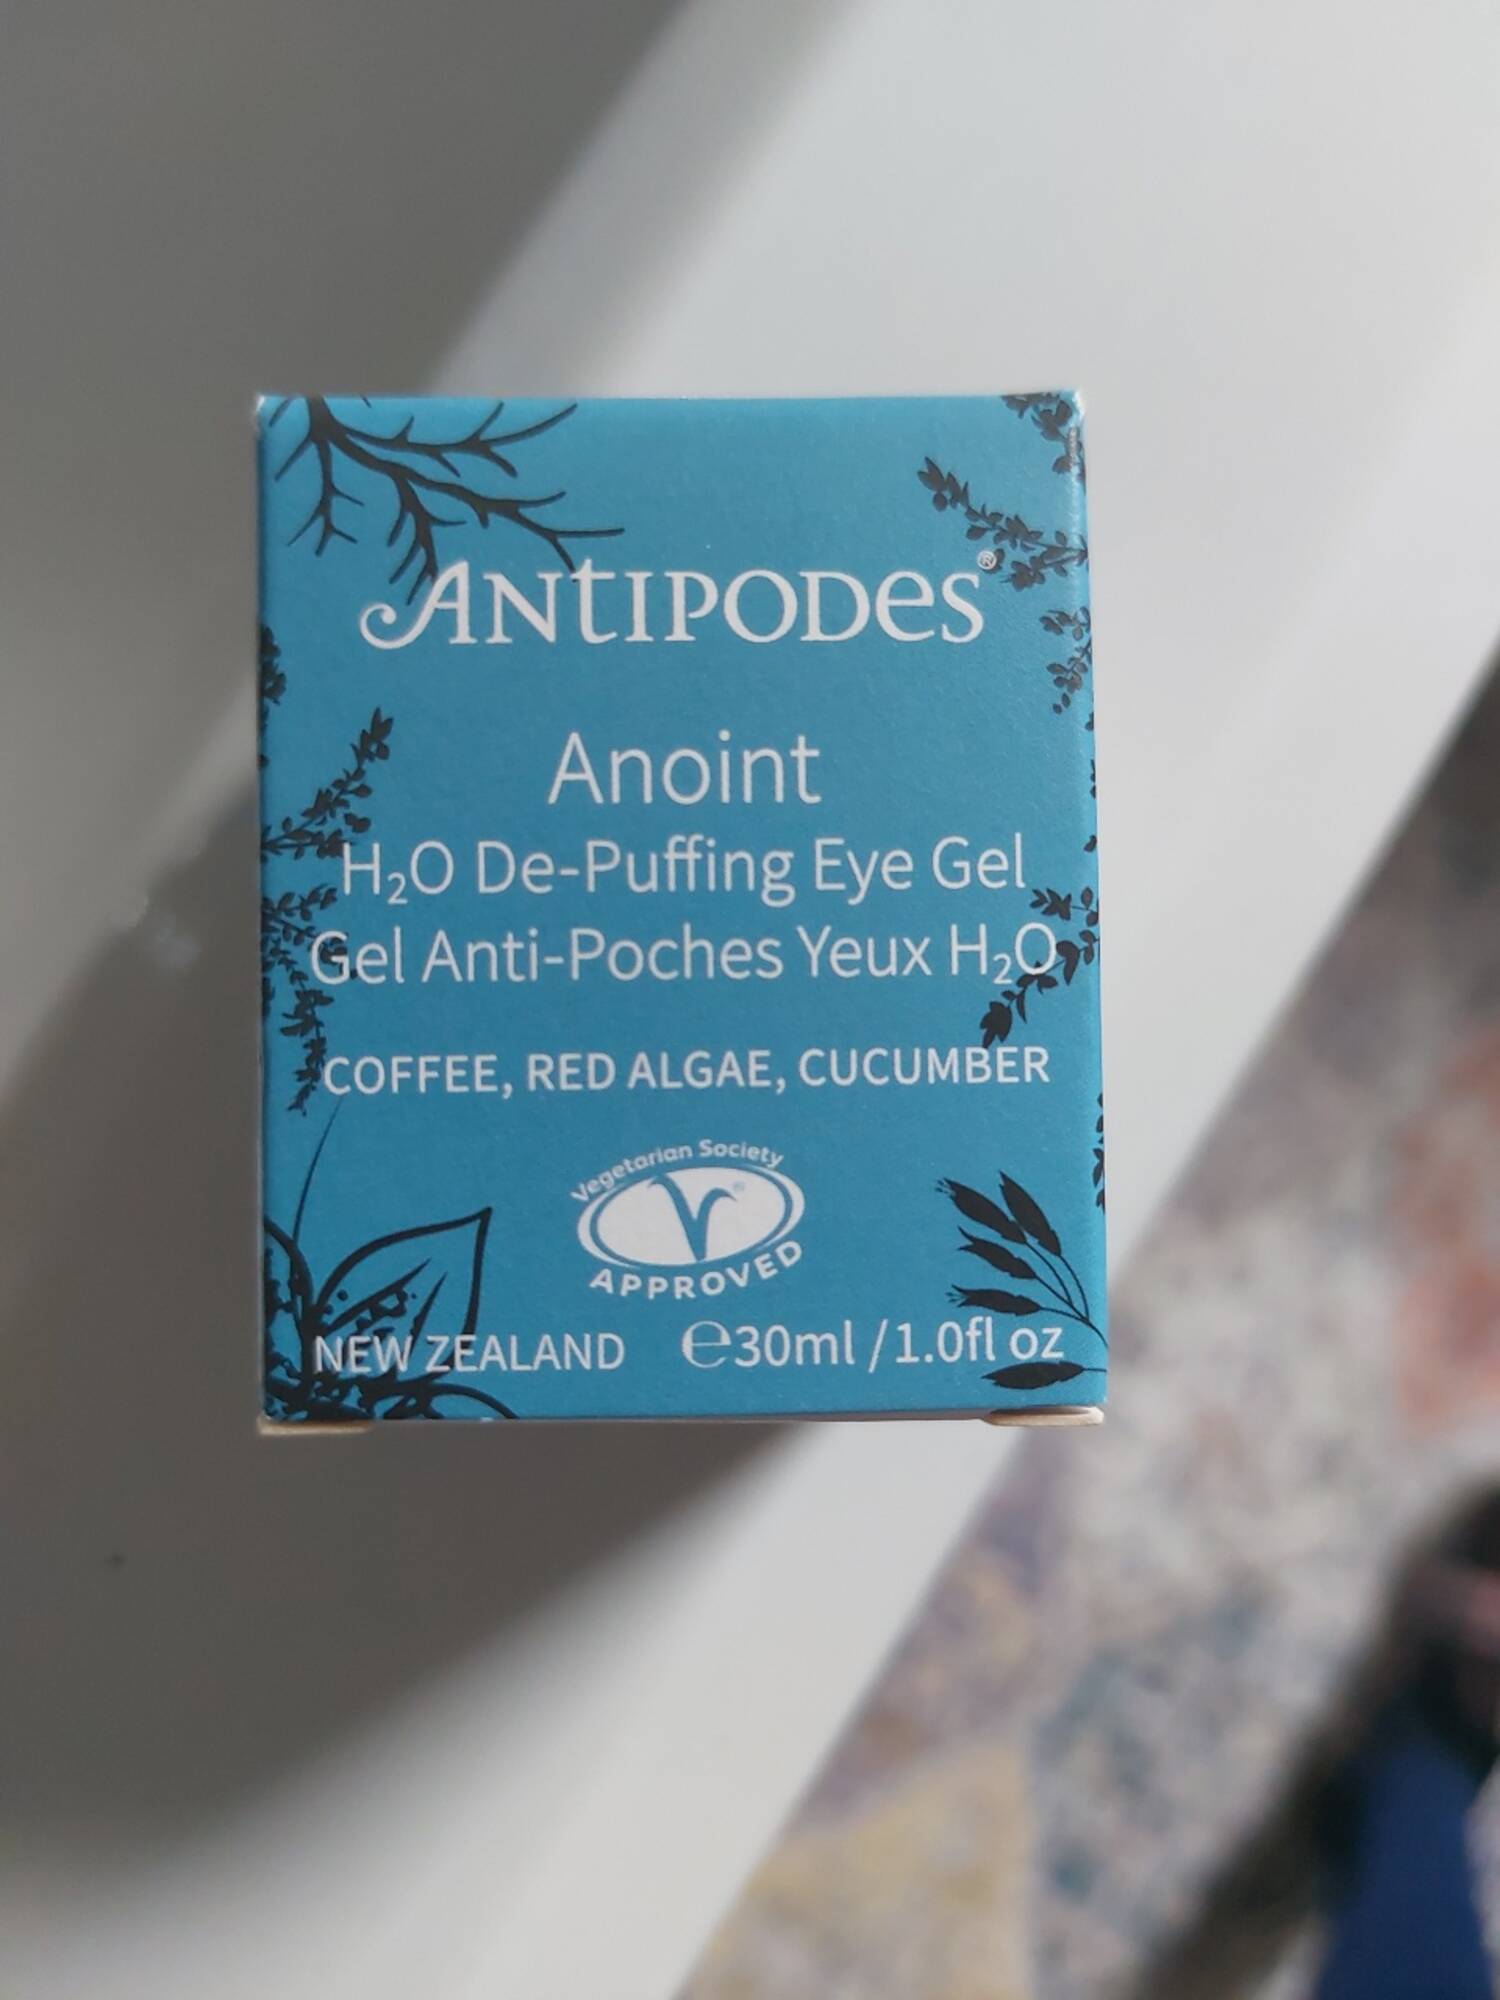 ANTIPODES - Anoint - Gel anti-poches yeux H2O 